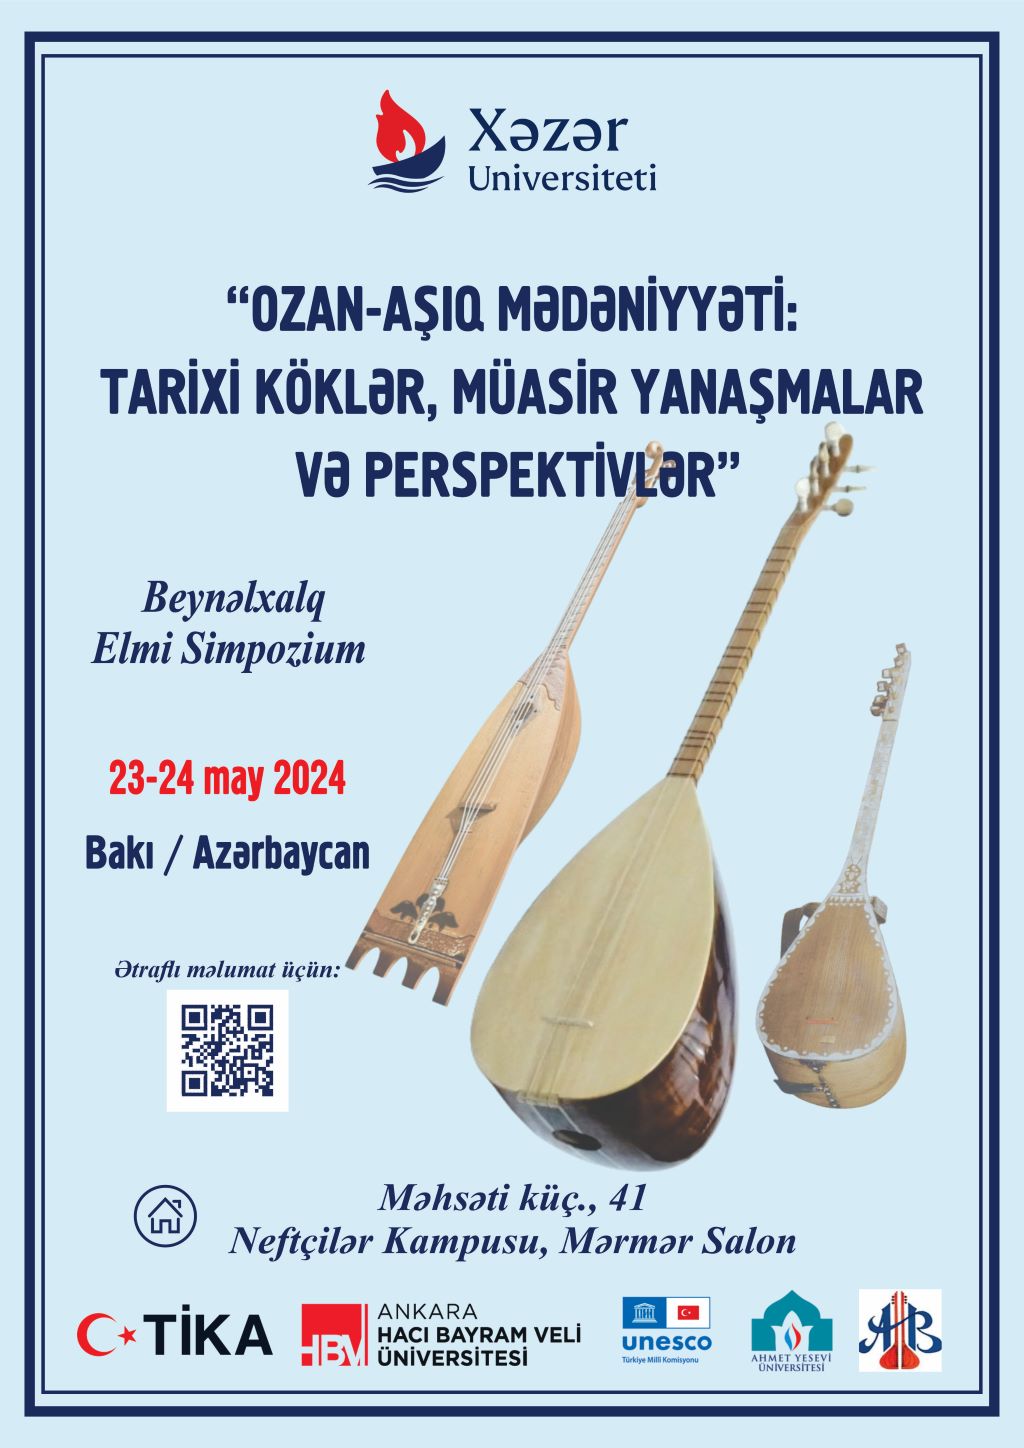 International Scientific Symposium to be Held on "Culture of Ozan-ashugh: Historical Roots, Modern Approaches and Perspectives"